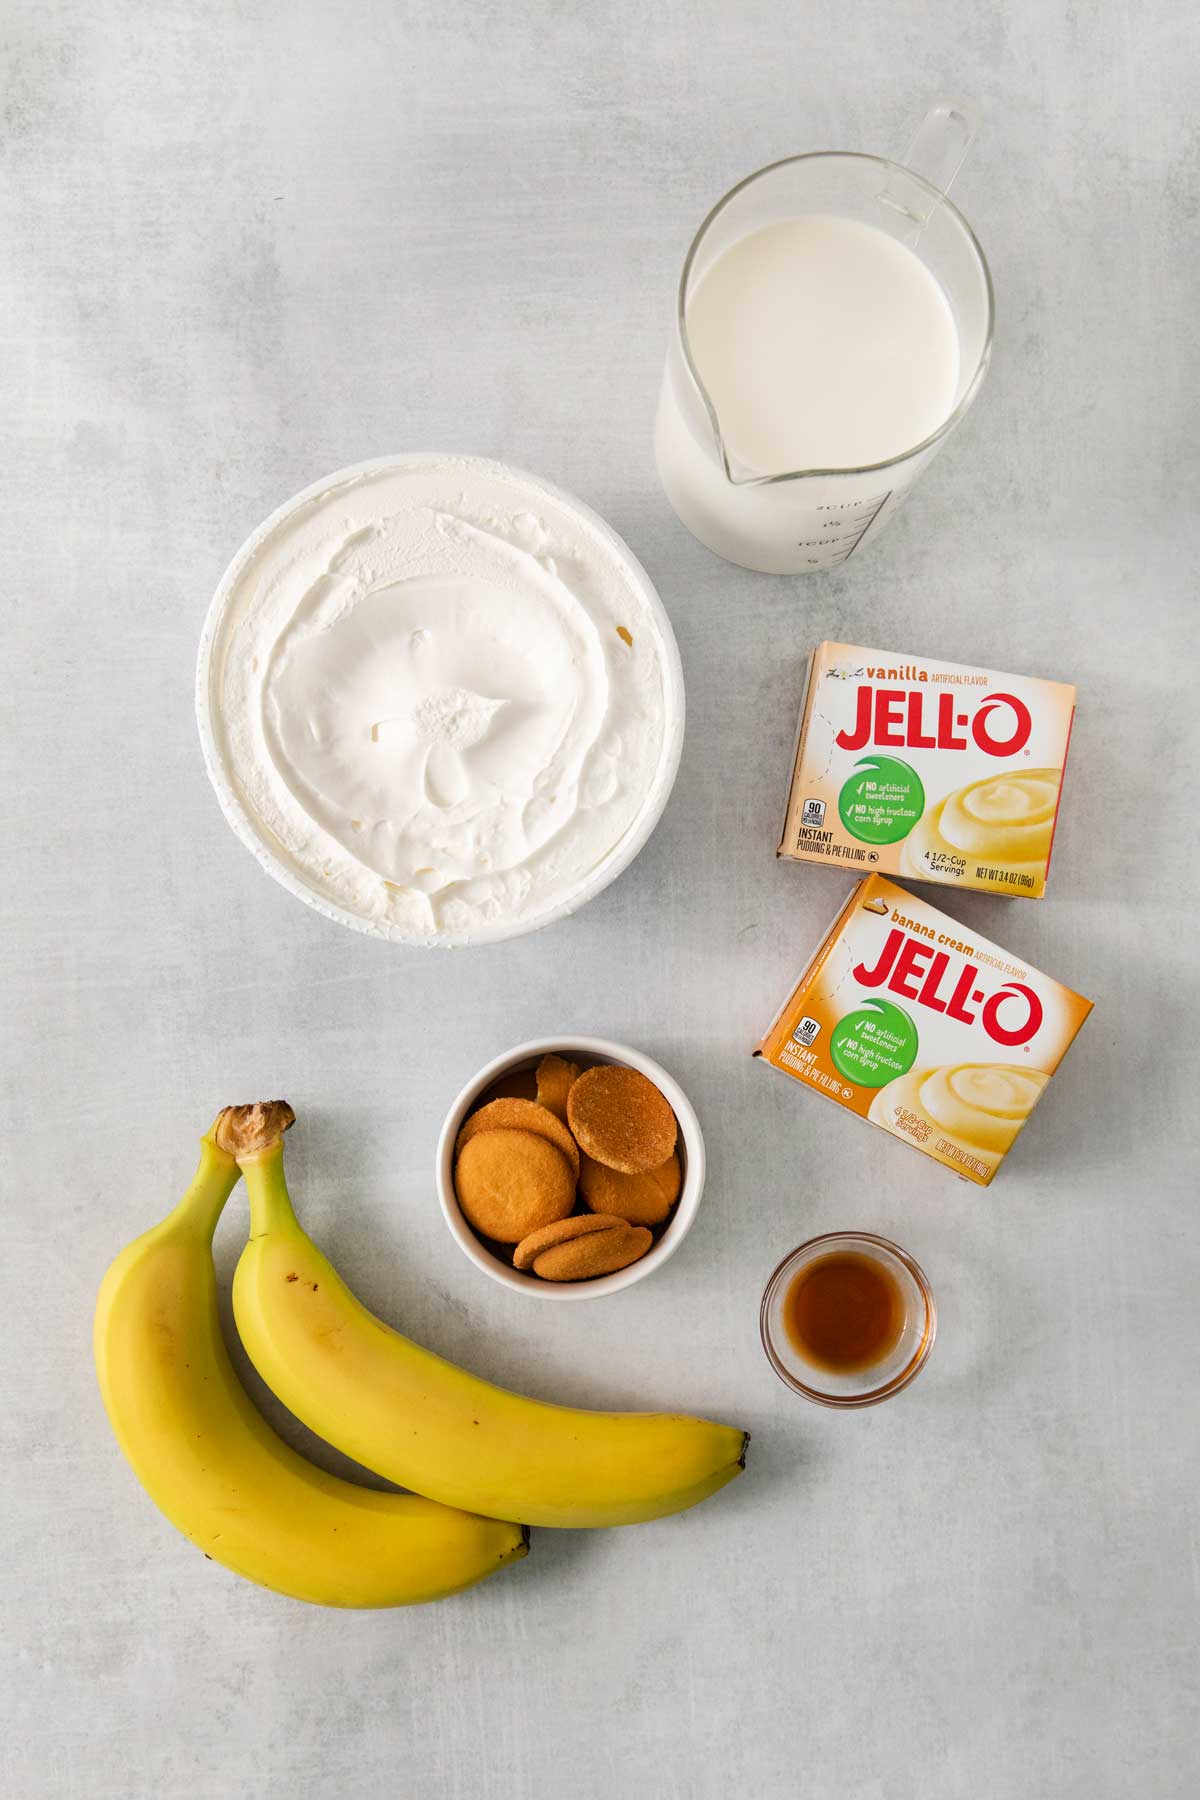 Ingredients for Banana Pudding Pie filling include instant banana pudding, instant vanilla pudding, cool whip, and pure vanilla extract.